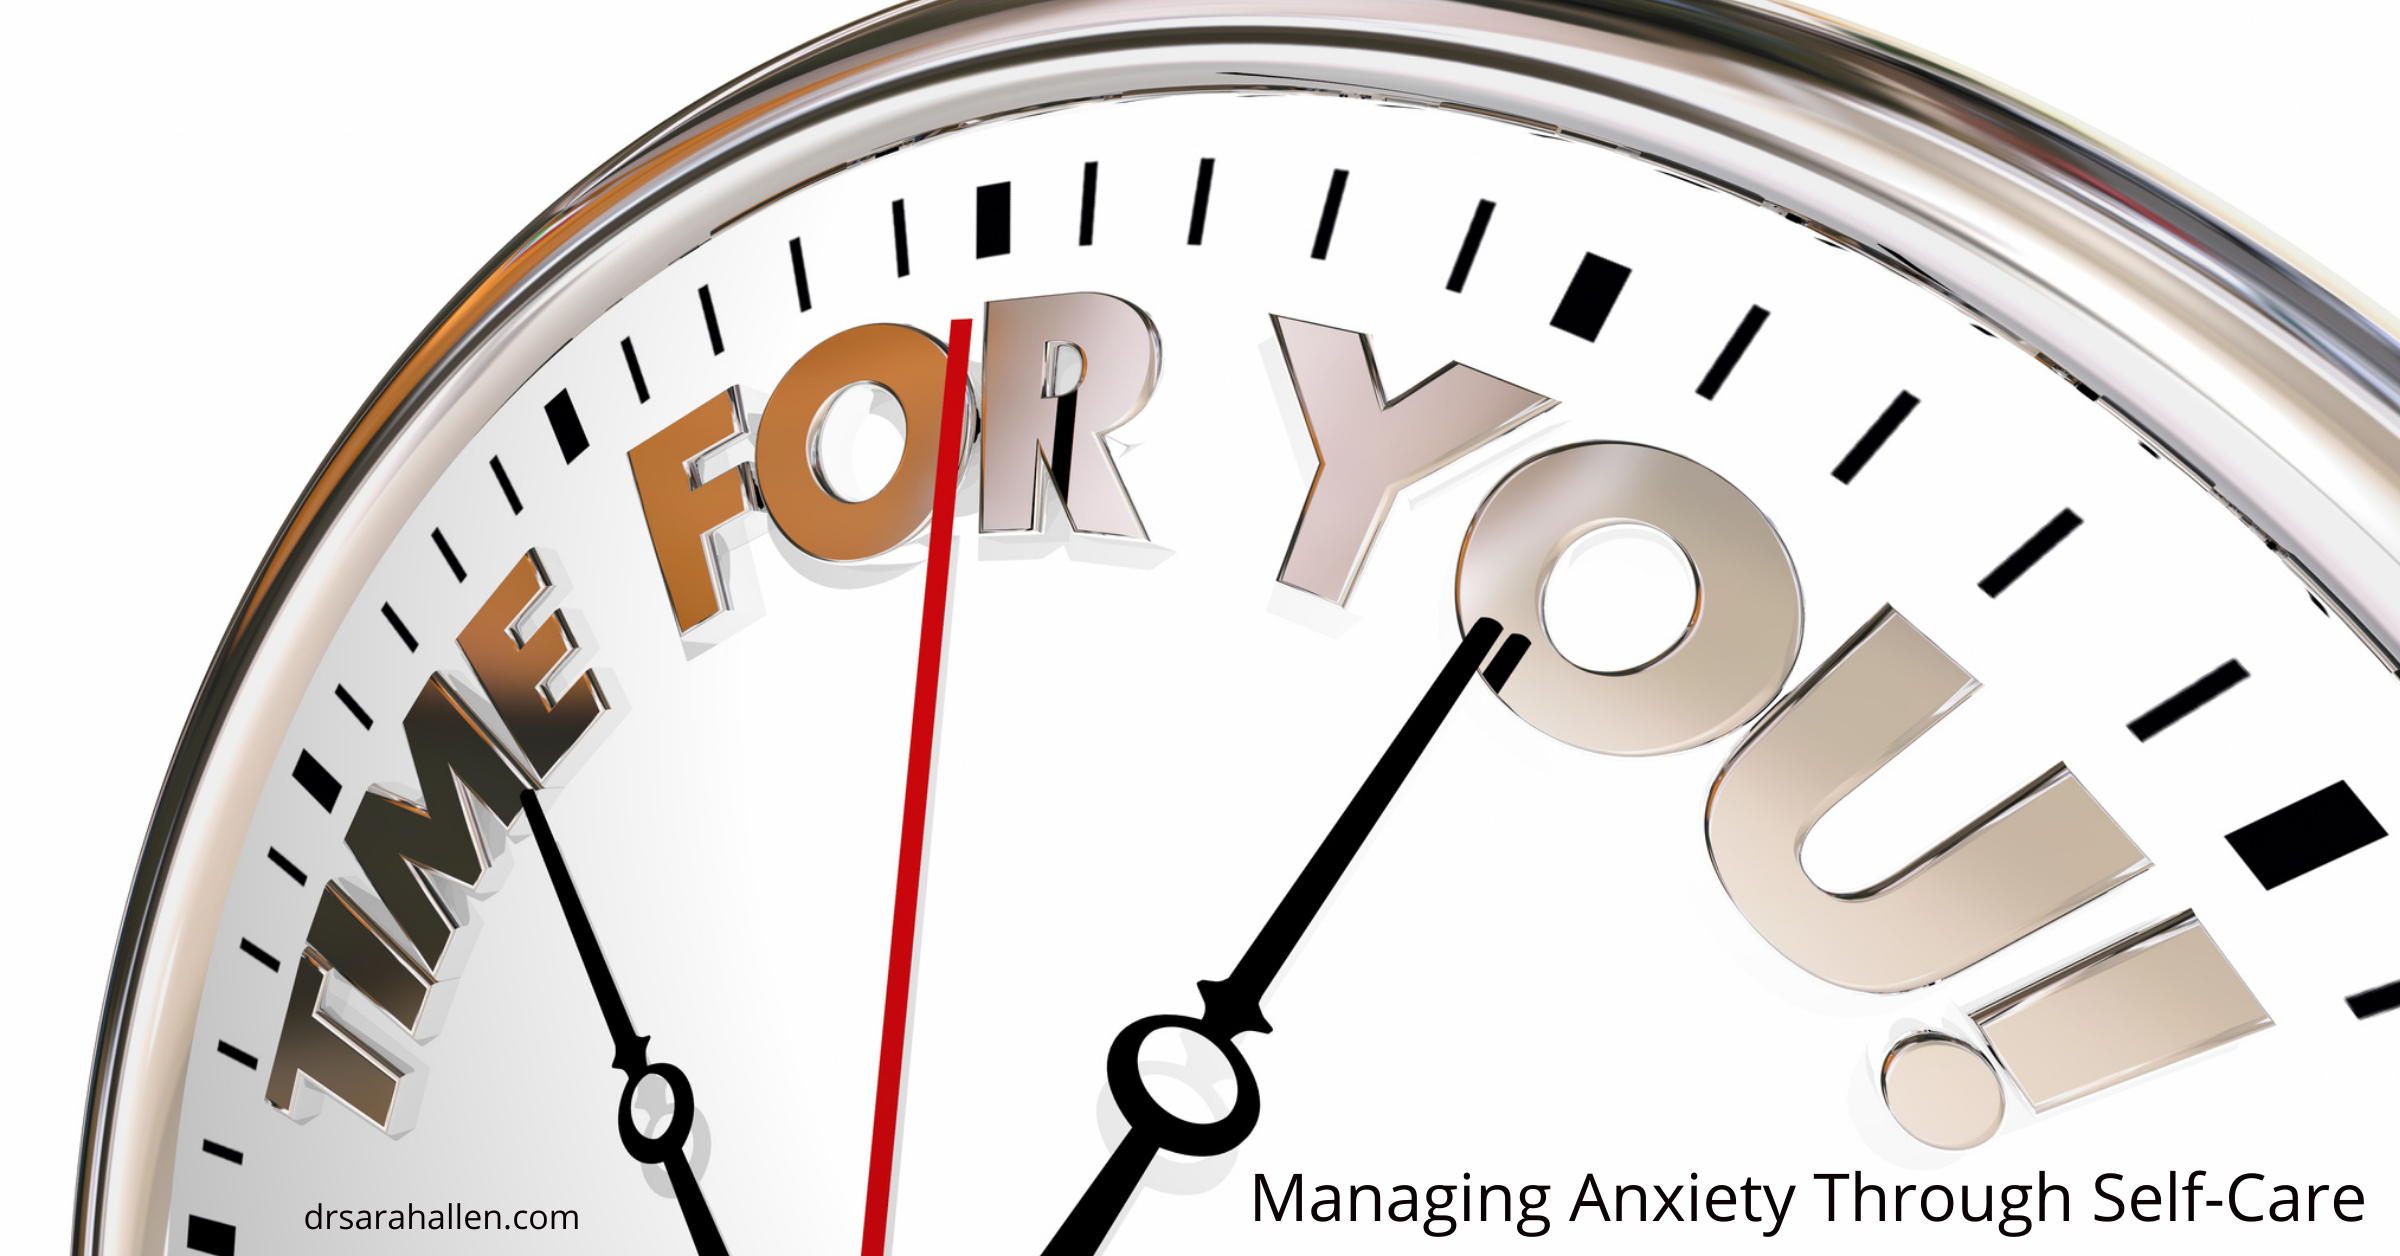 How to help manage anxiety with self care, physical activity, mindfulness, social connections and professional help